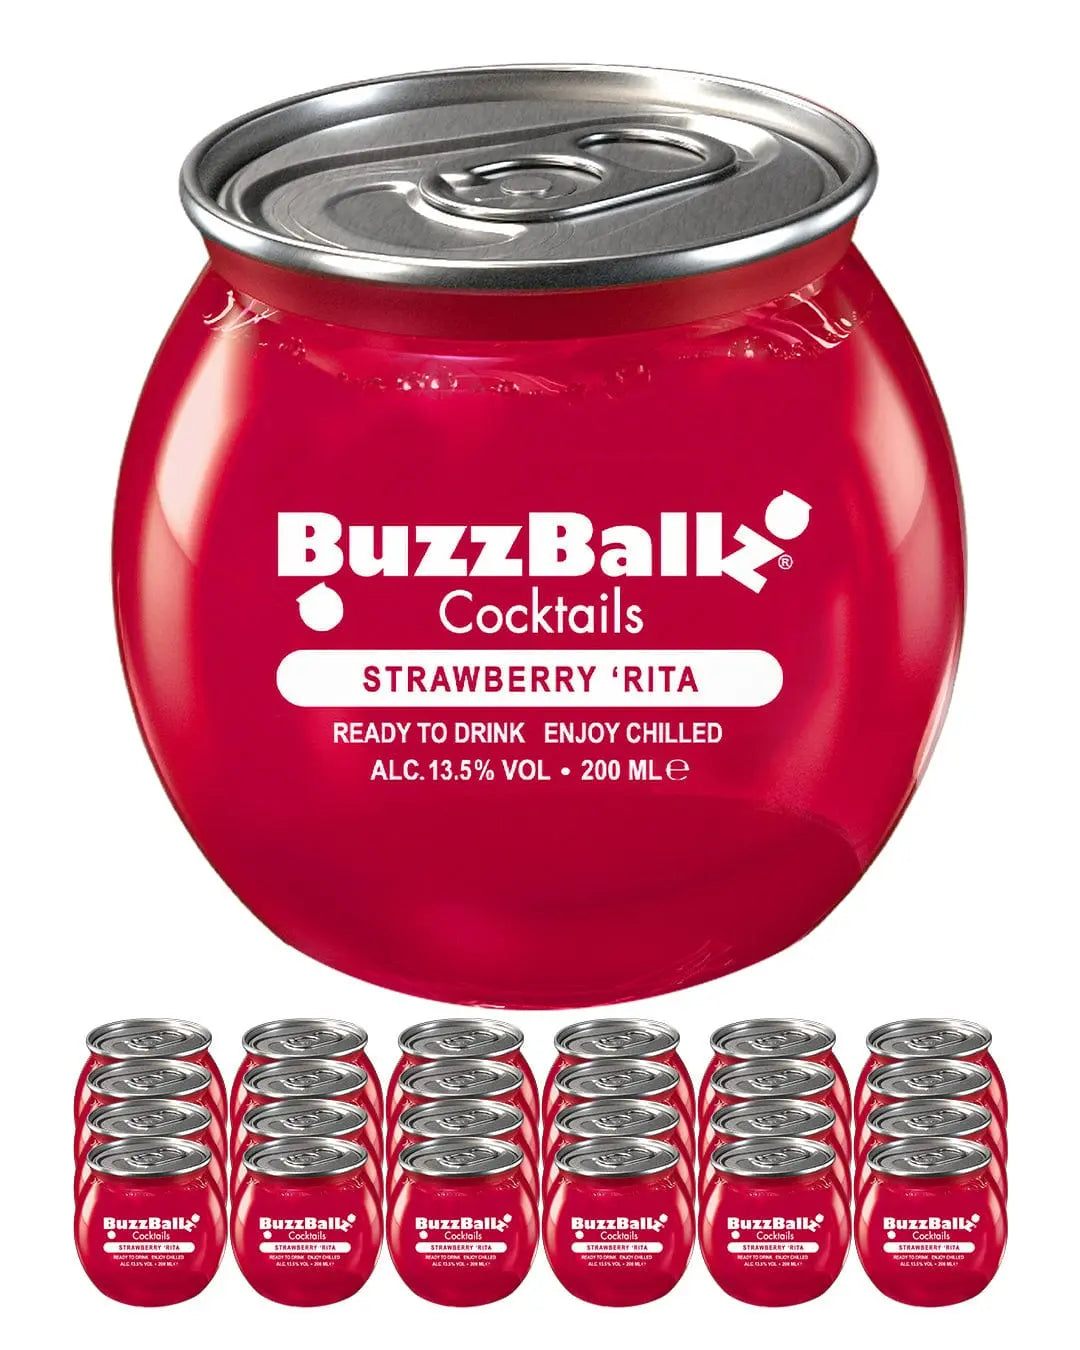 BuzzBallz Strawberry Rita Cocktail Multipack, 24 x 200 ml Ready Made Cocktails